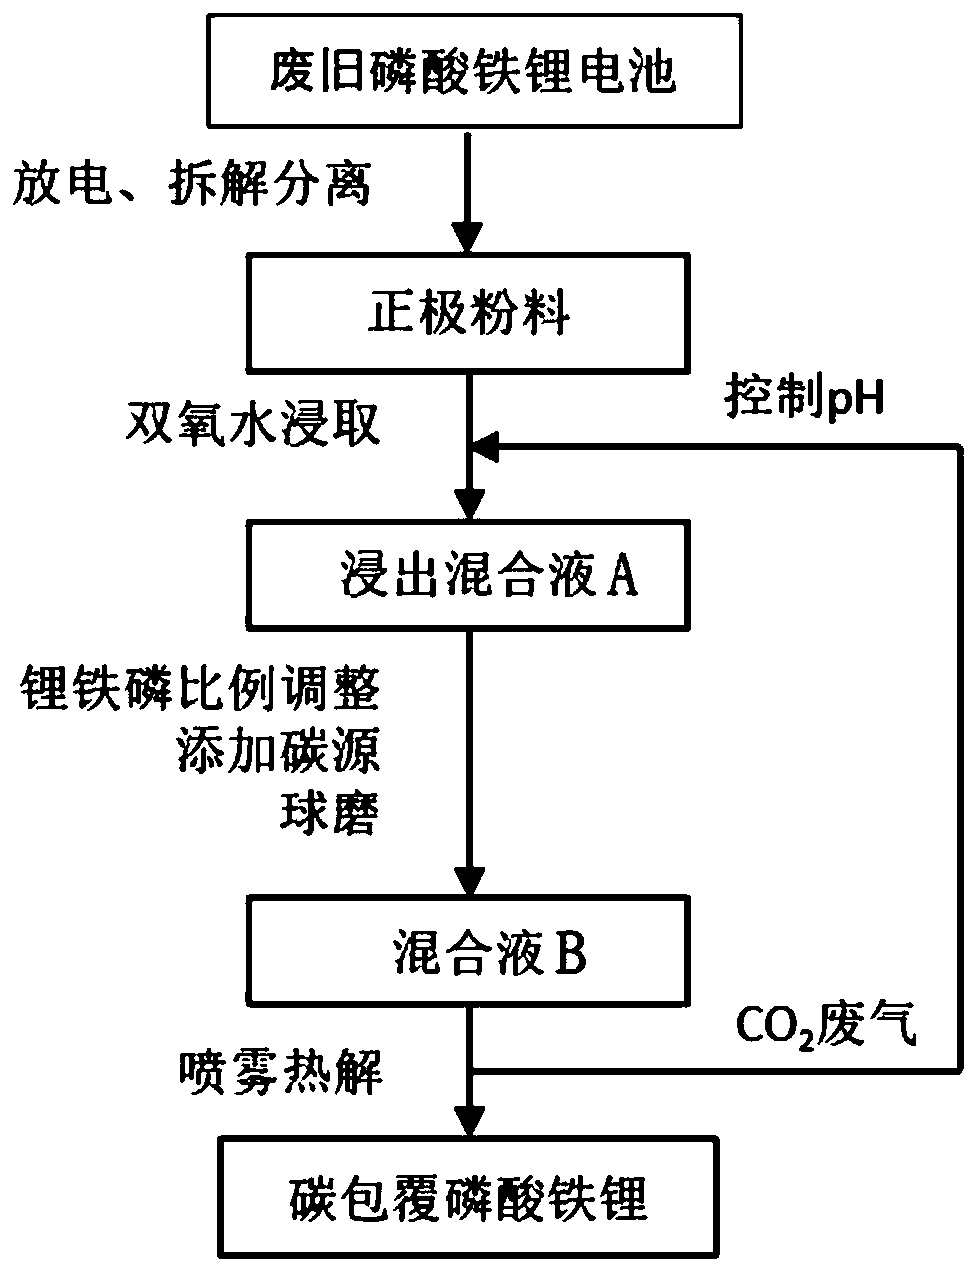 Regeneration method for positive electrode material of waste lithium iron phosphate battery